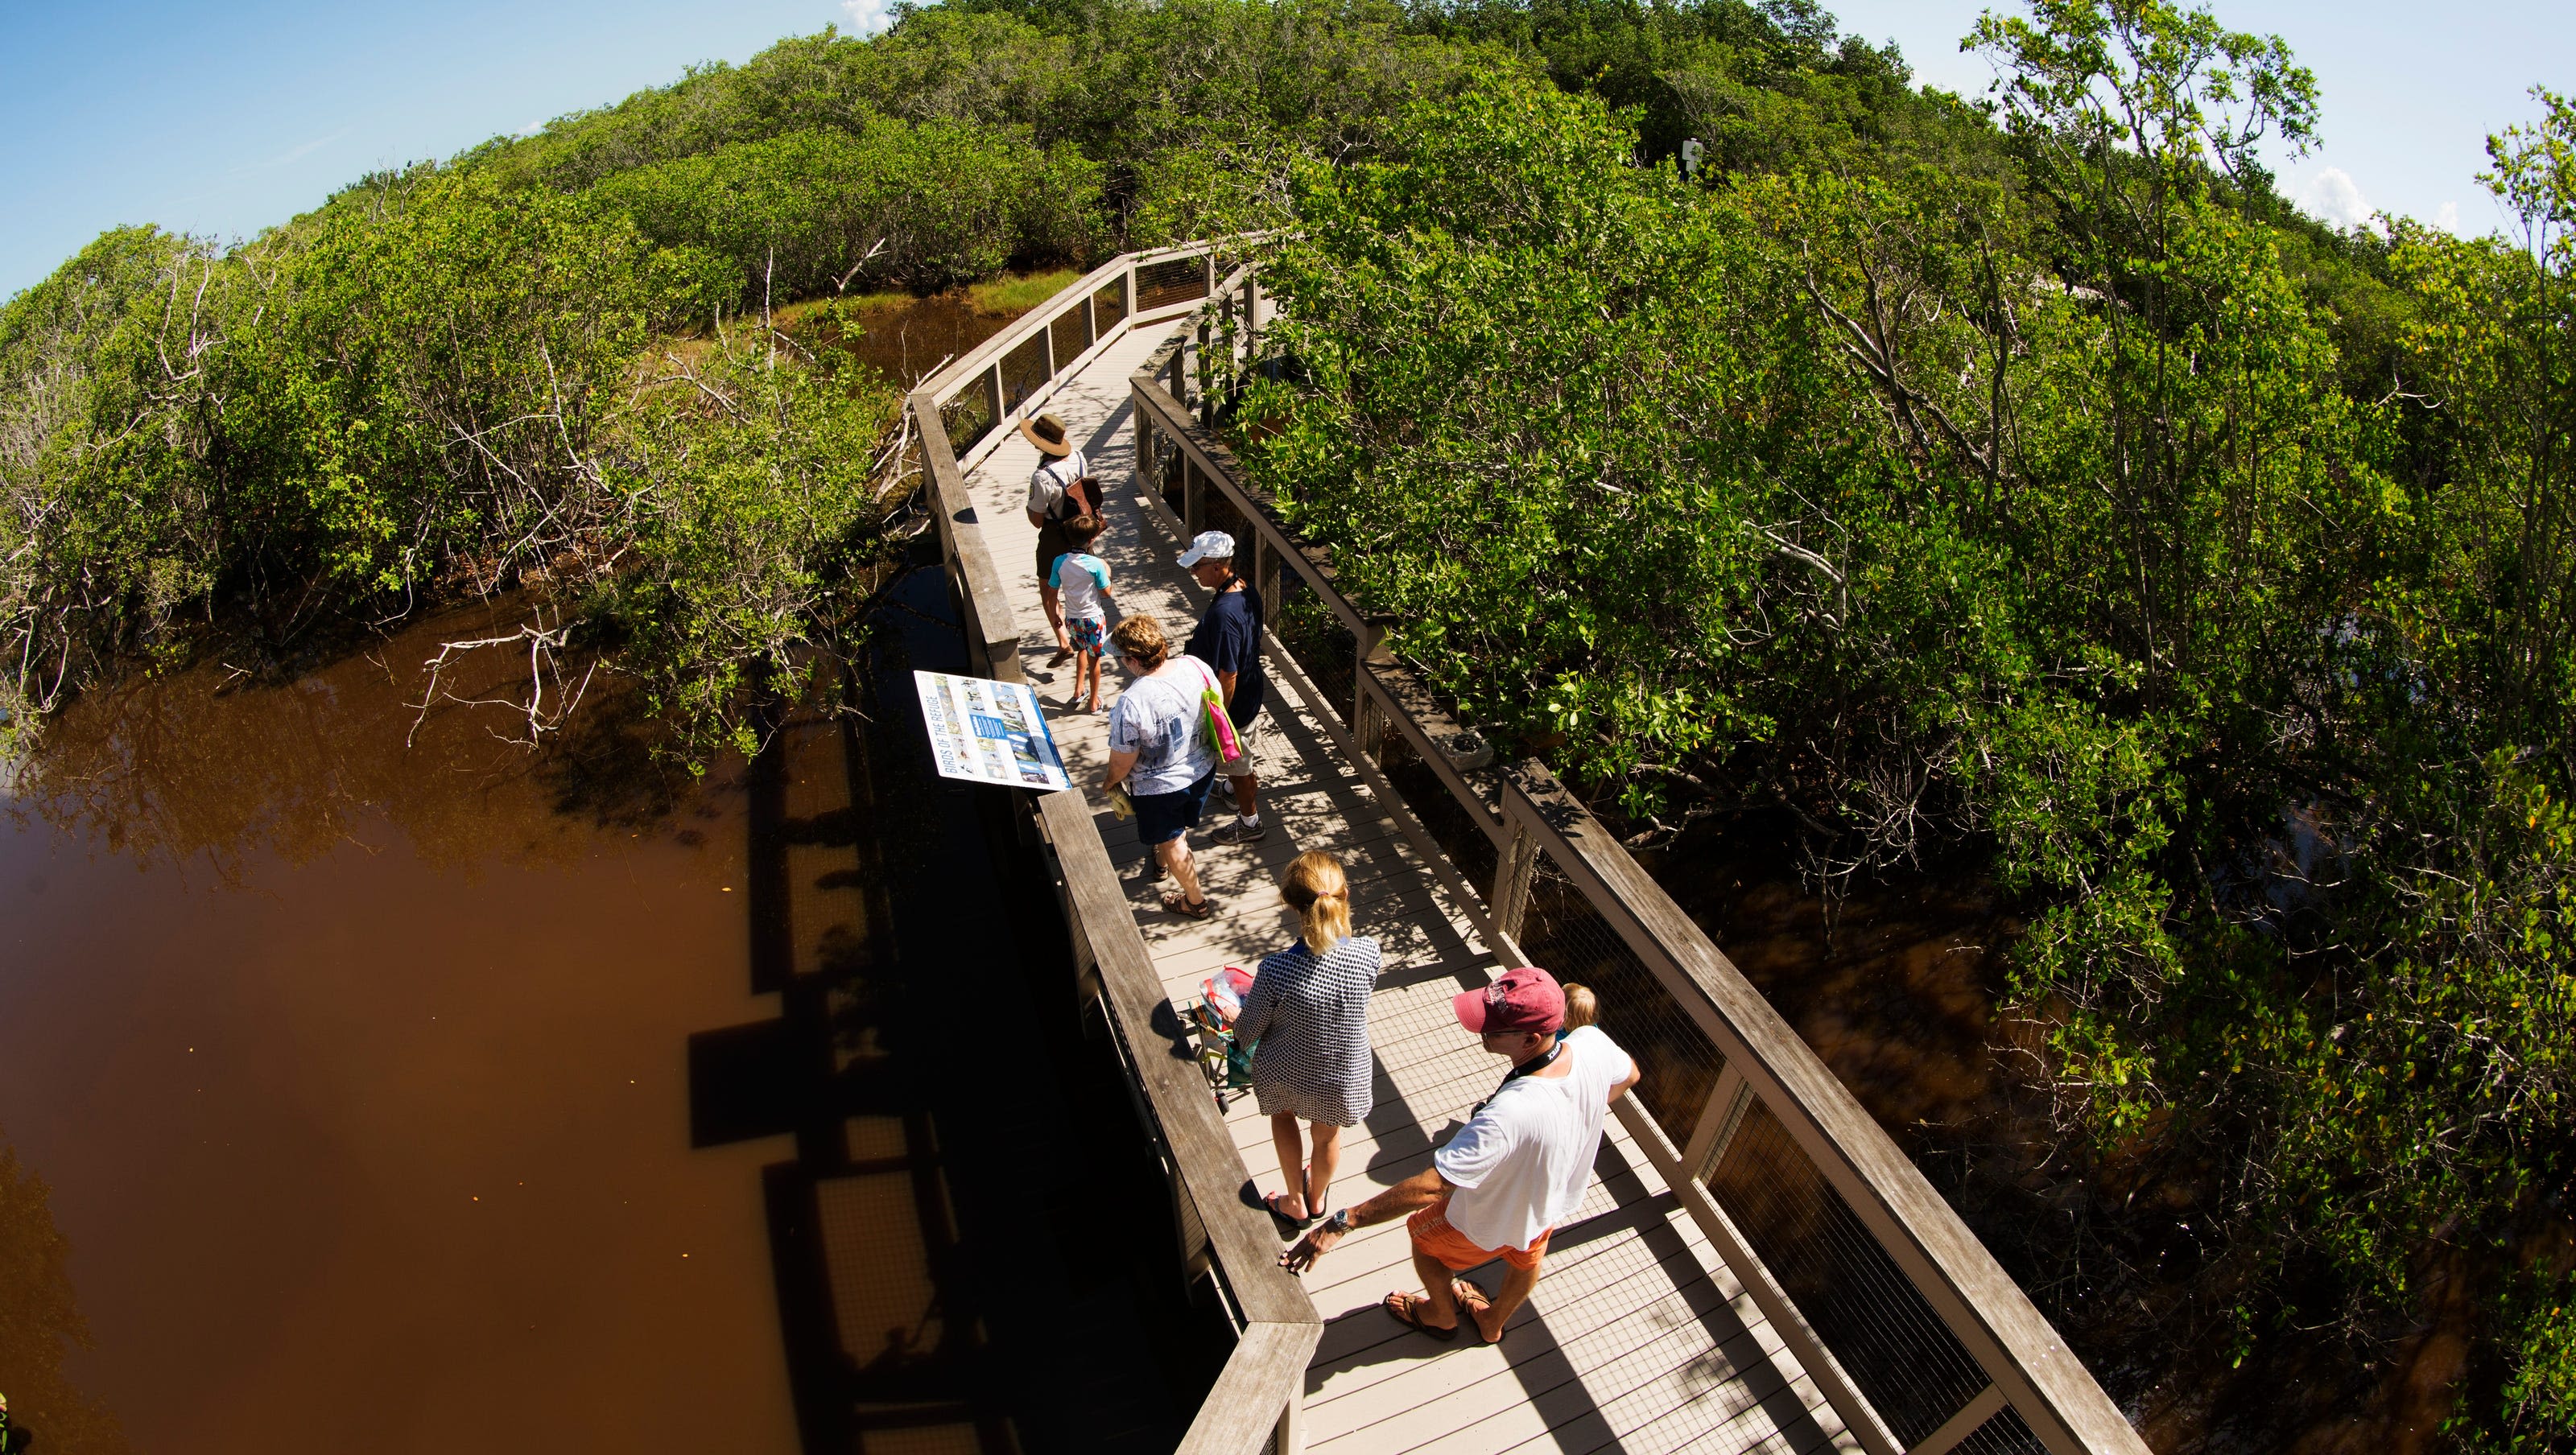 USA TODAY readers picked Florida location as a 'Best Hiking Trail" in America. It's in SWFL